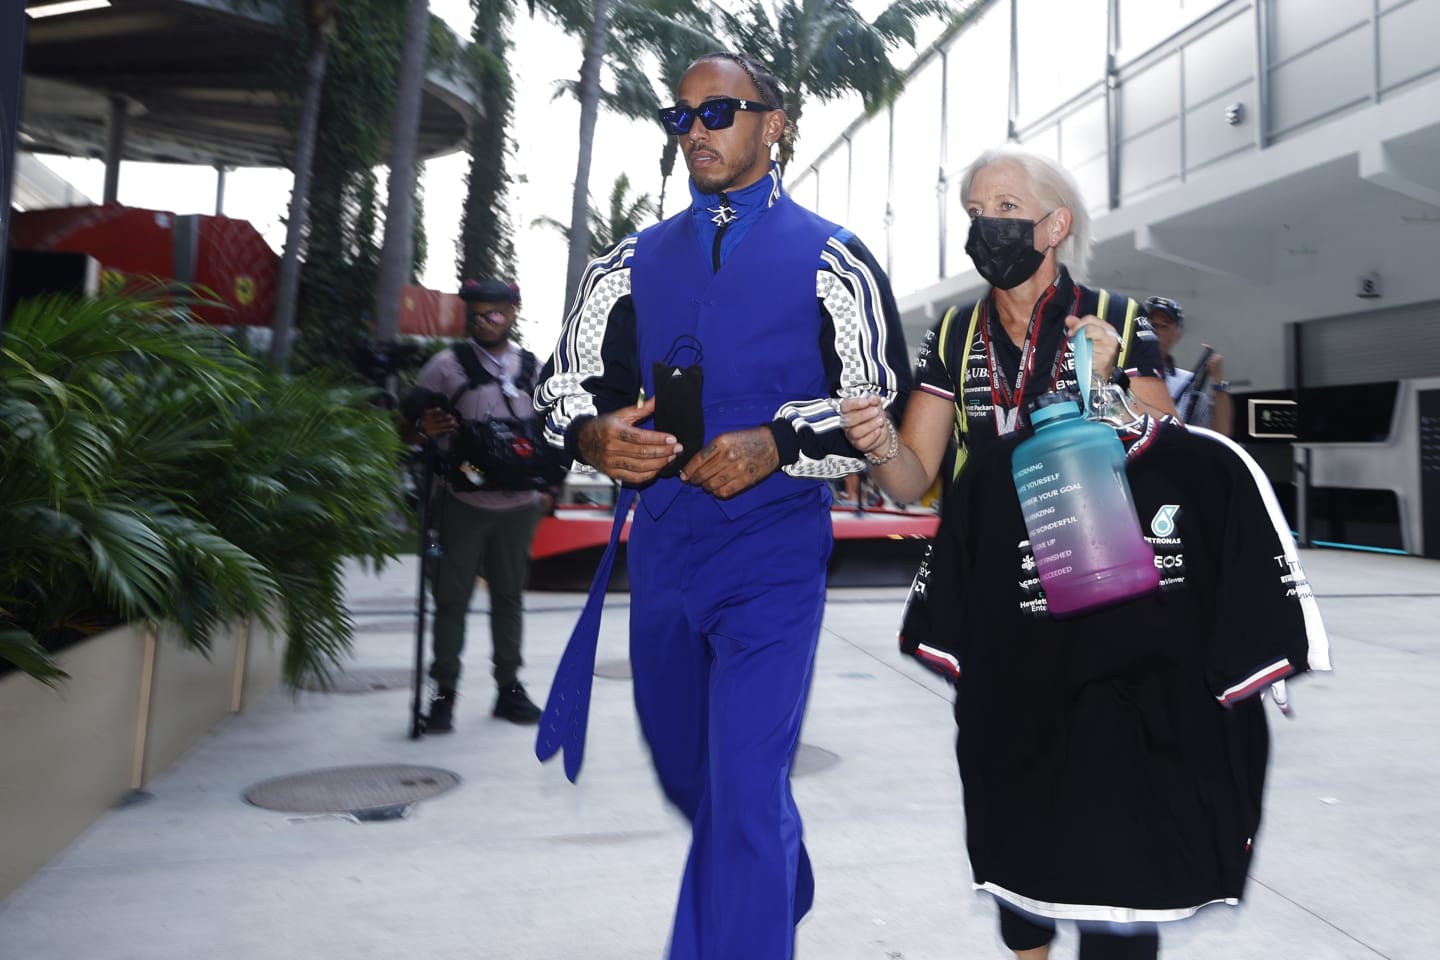 MIAMI, FLORIDA - MAY 05: Lewis Hamilton of Great Britain and Mercedes walks in the Paddock during